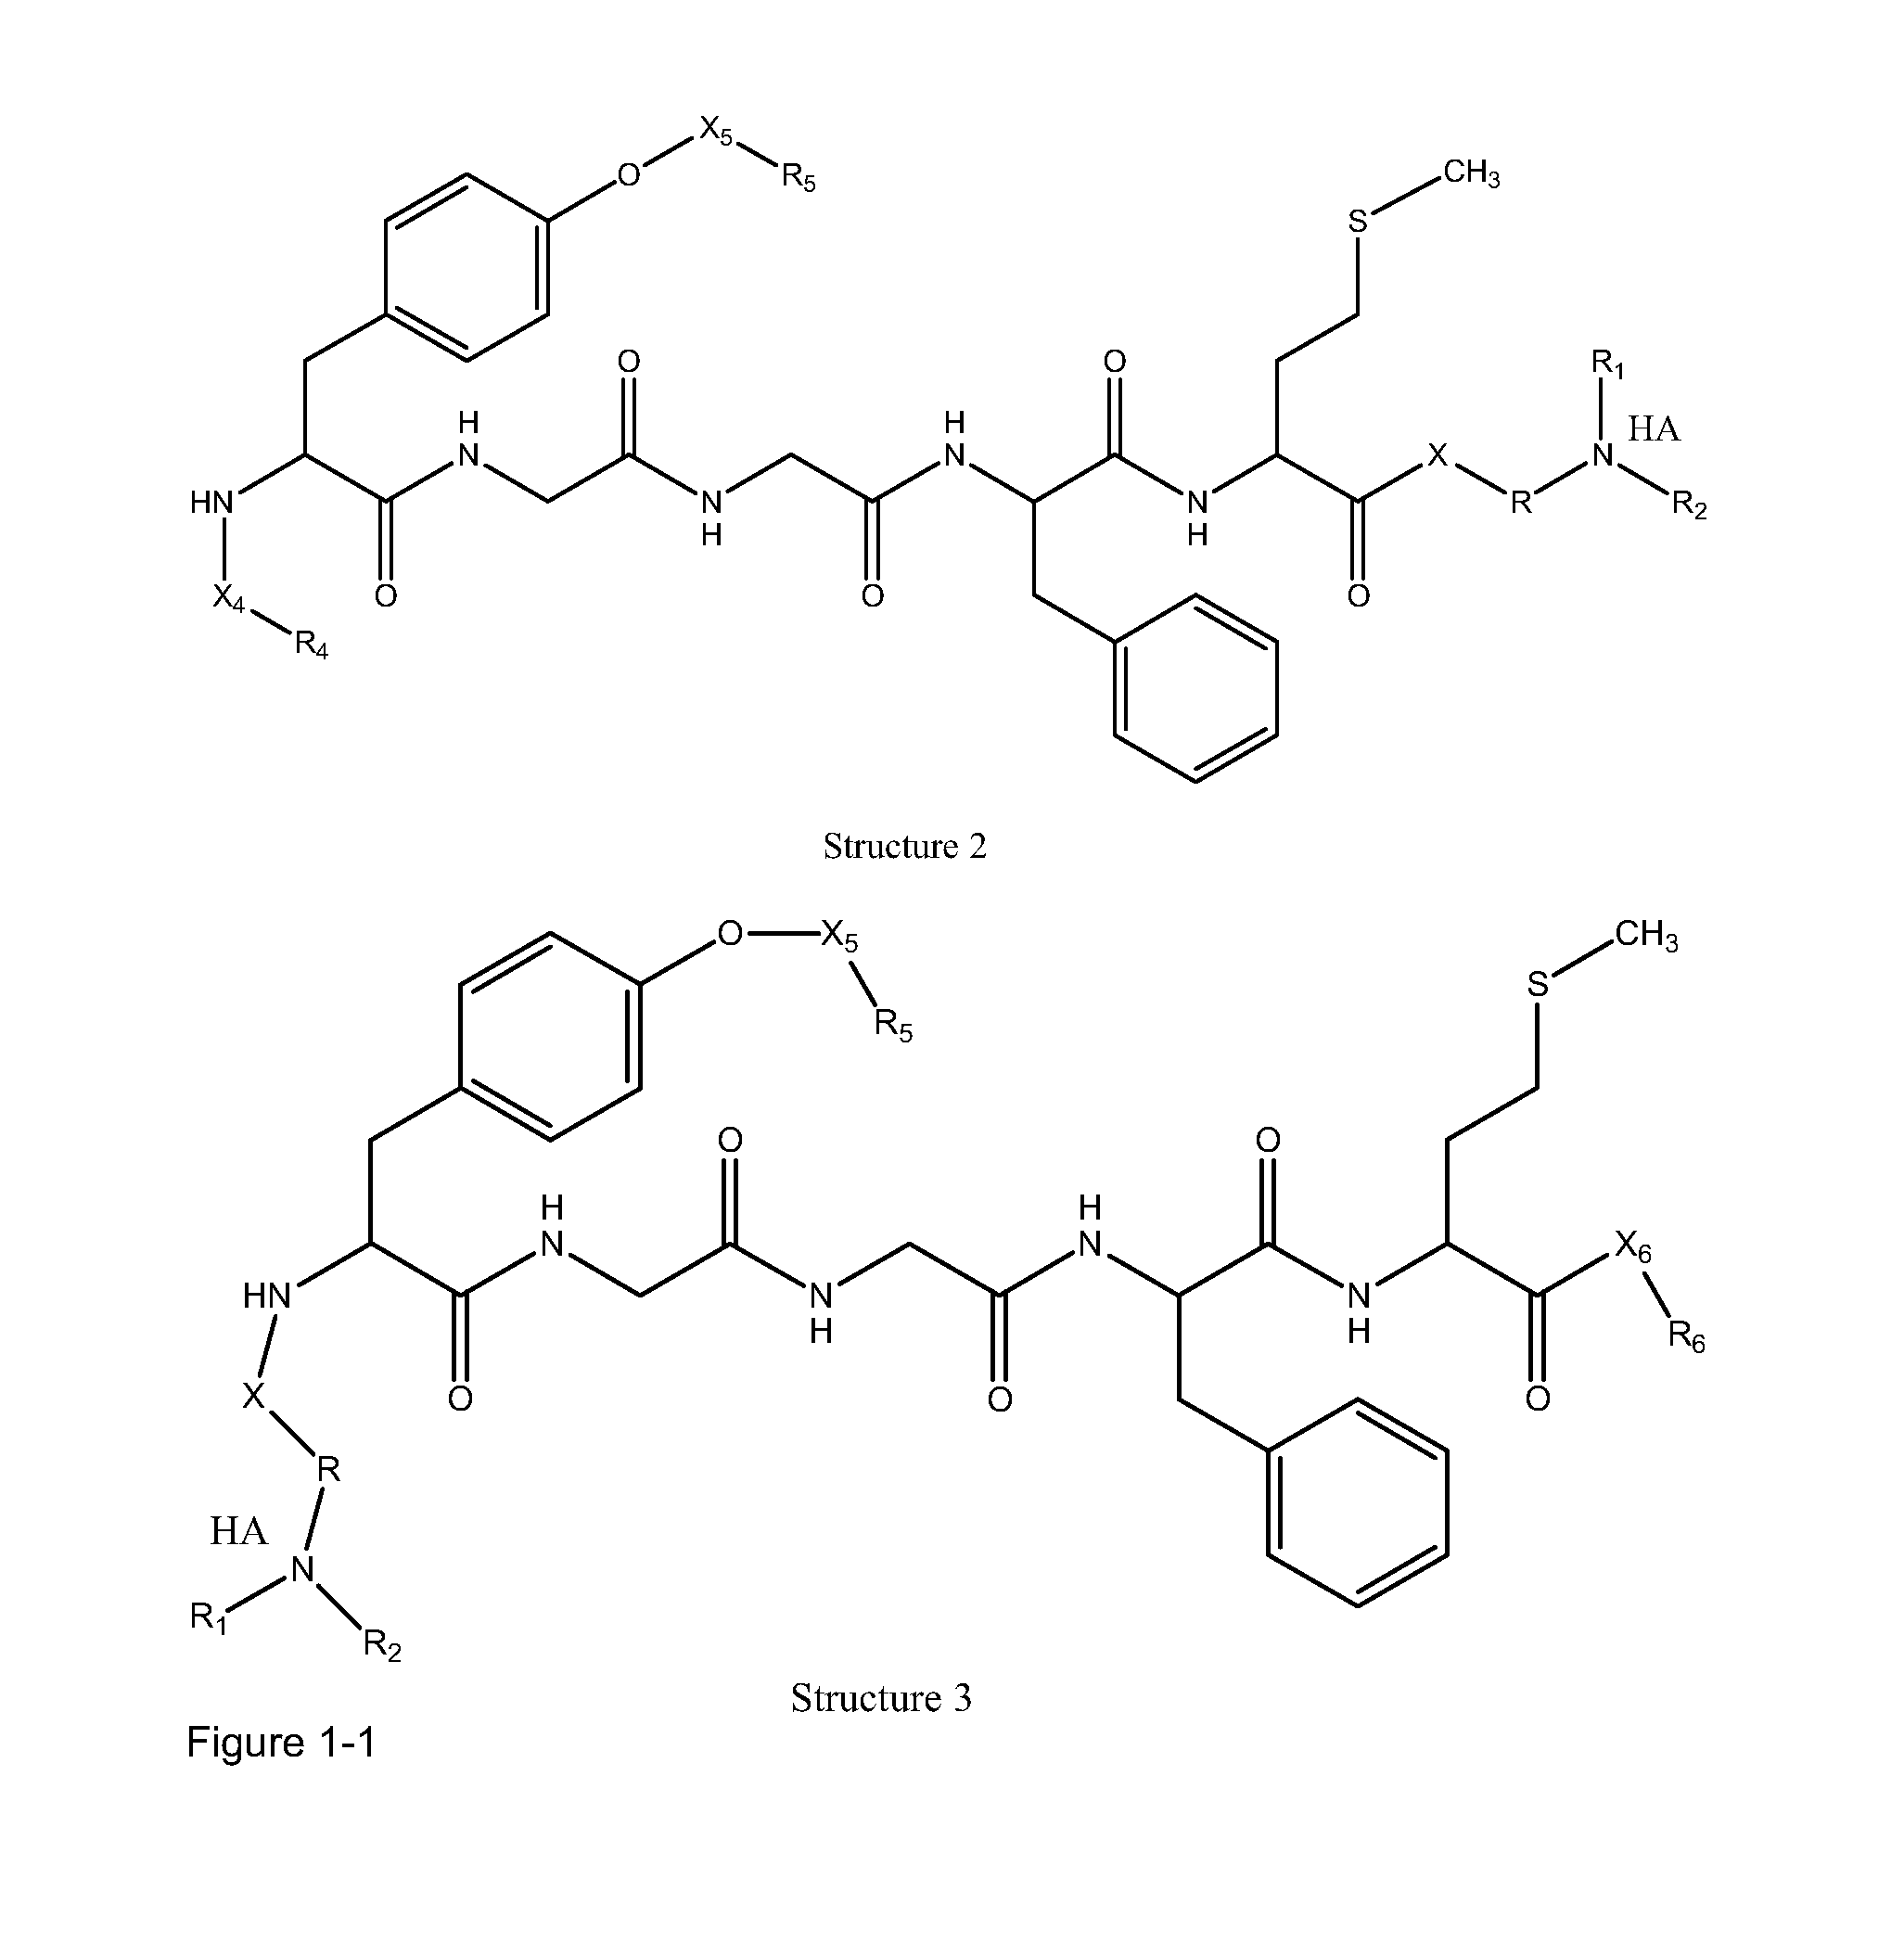 High penetration prodrug compositions of peptides and peptide-related compounds